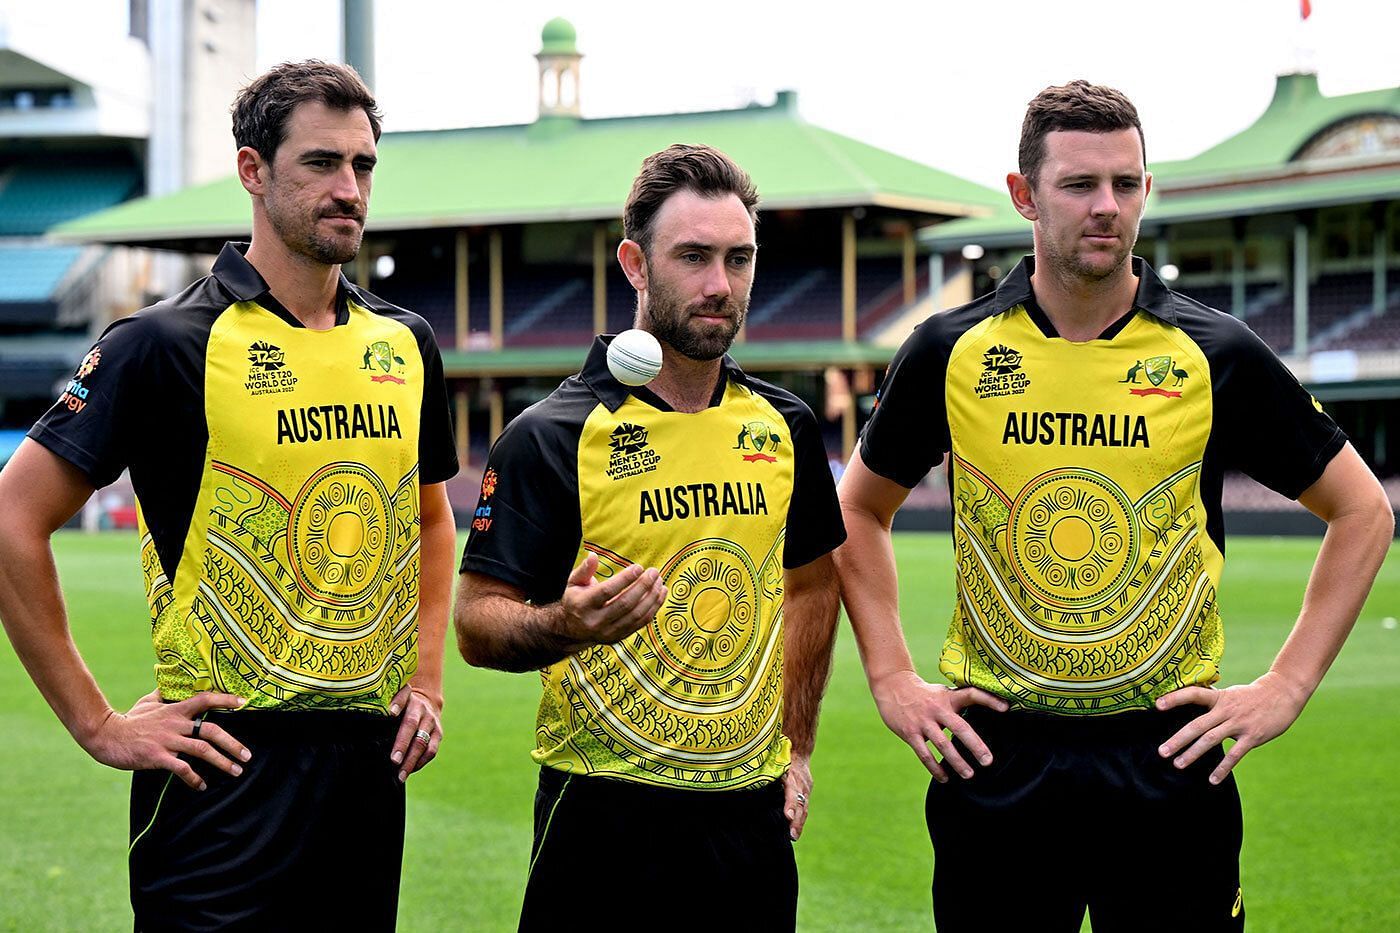 MAS unveils official ICC Men's T-20 World Cup cricket jersey for